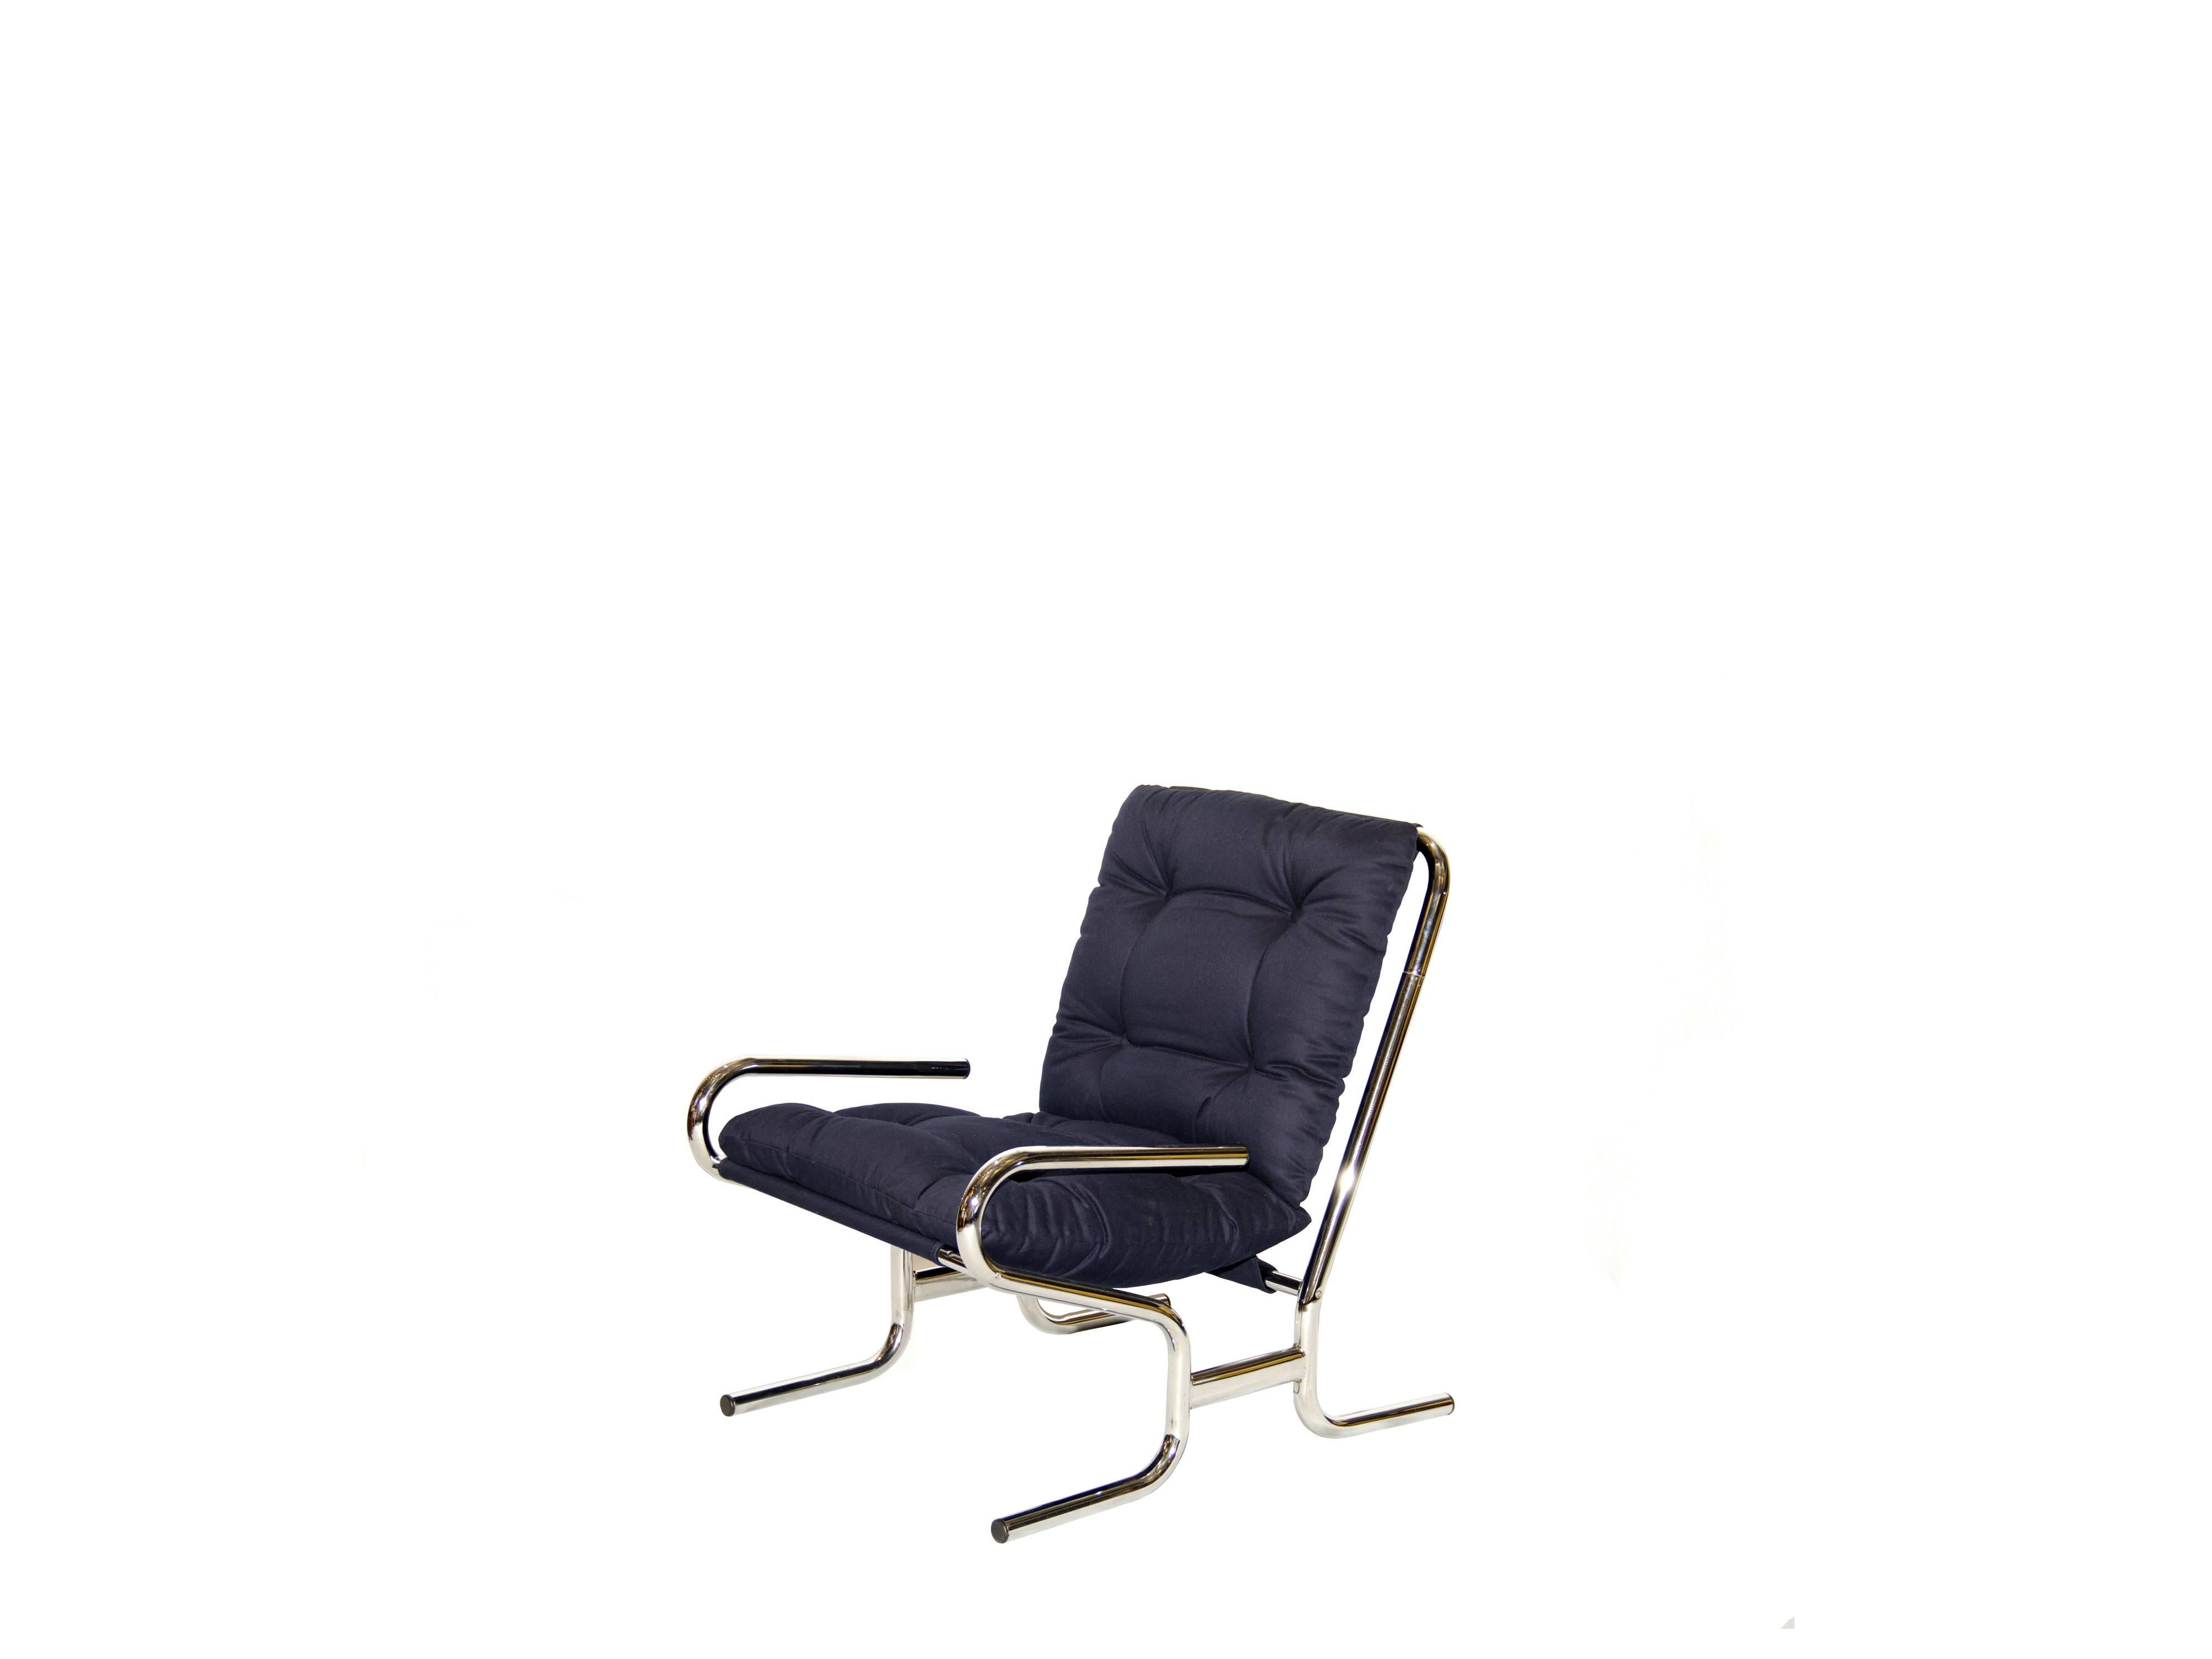 Midcentury brazilian chromed Metal Frame Armchair and Blue Upholstery, 1970s

This armchair, not yet known, has the entire structure in chrome-plated metal tube. The fabric that serves as a support for the upholstery is sewn firmly into the frame,